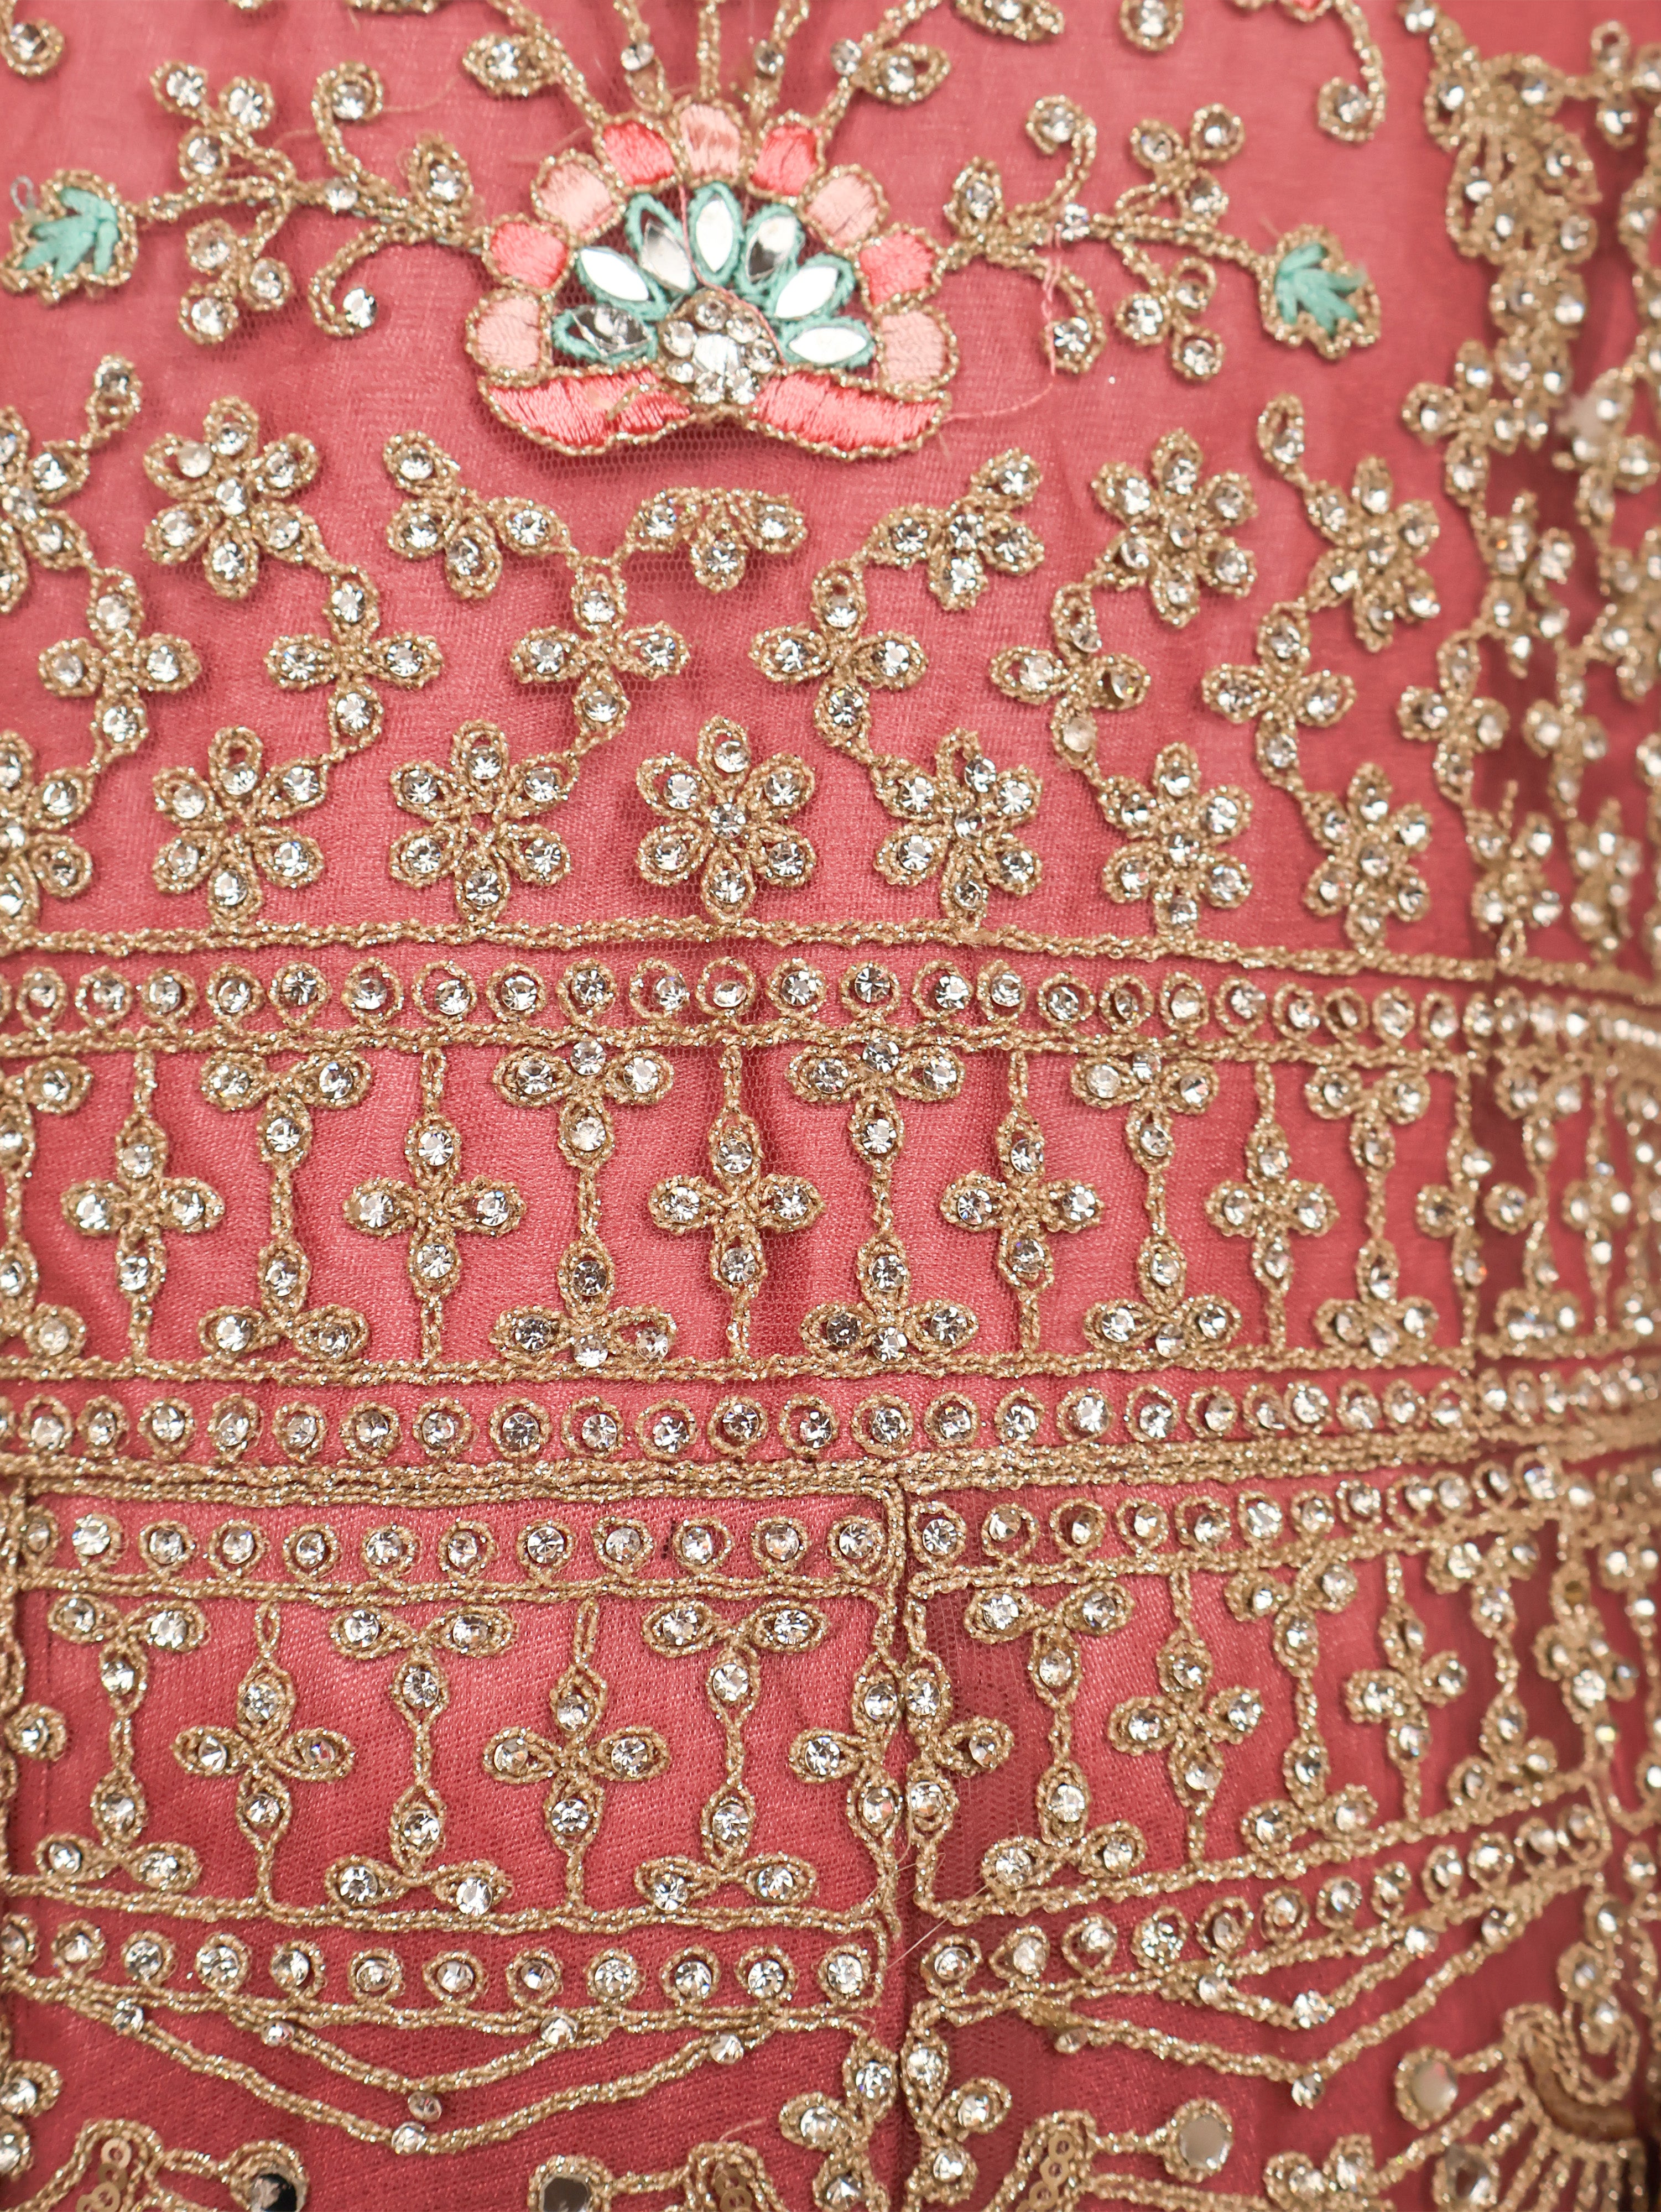 Gown with Stone Work &amp; Embroidery by Shreekama Onion Designer Gowns for Party Festival Wedding Occasion in Noida